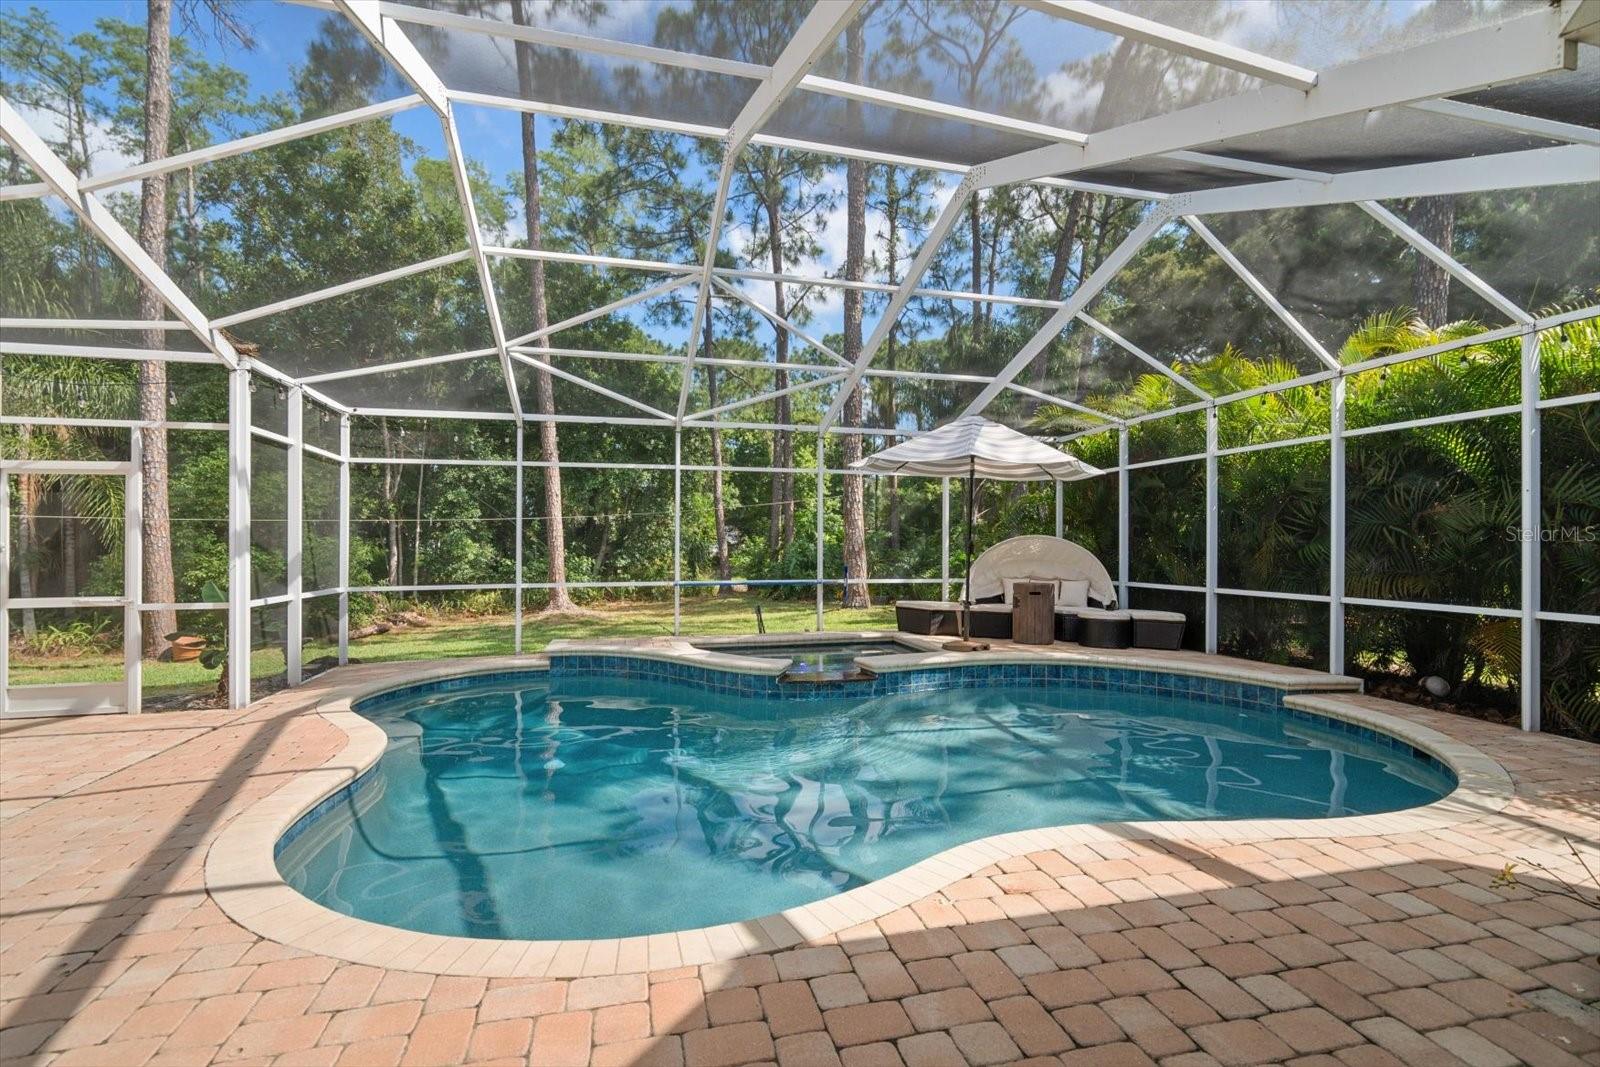 Gorgeous pool area with paver patio